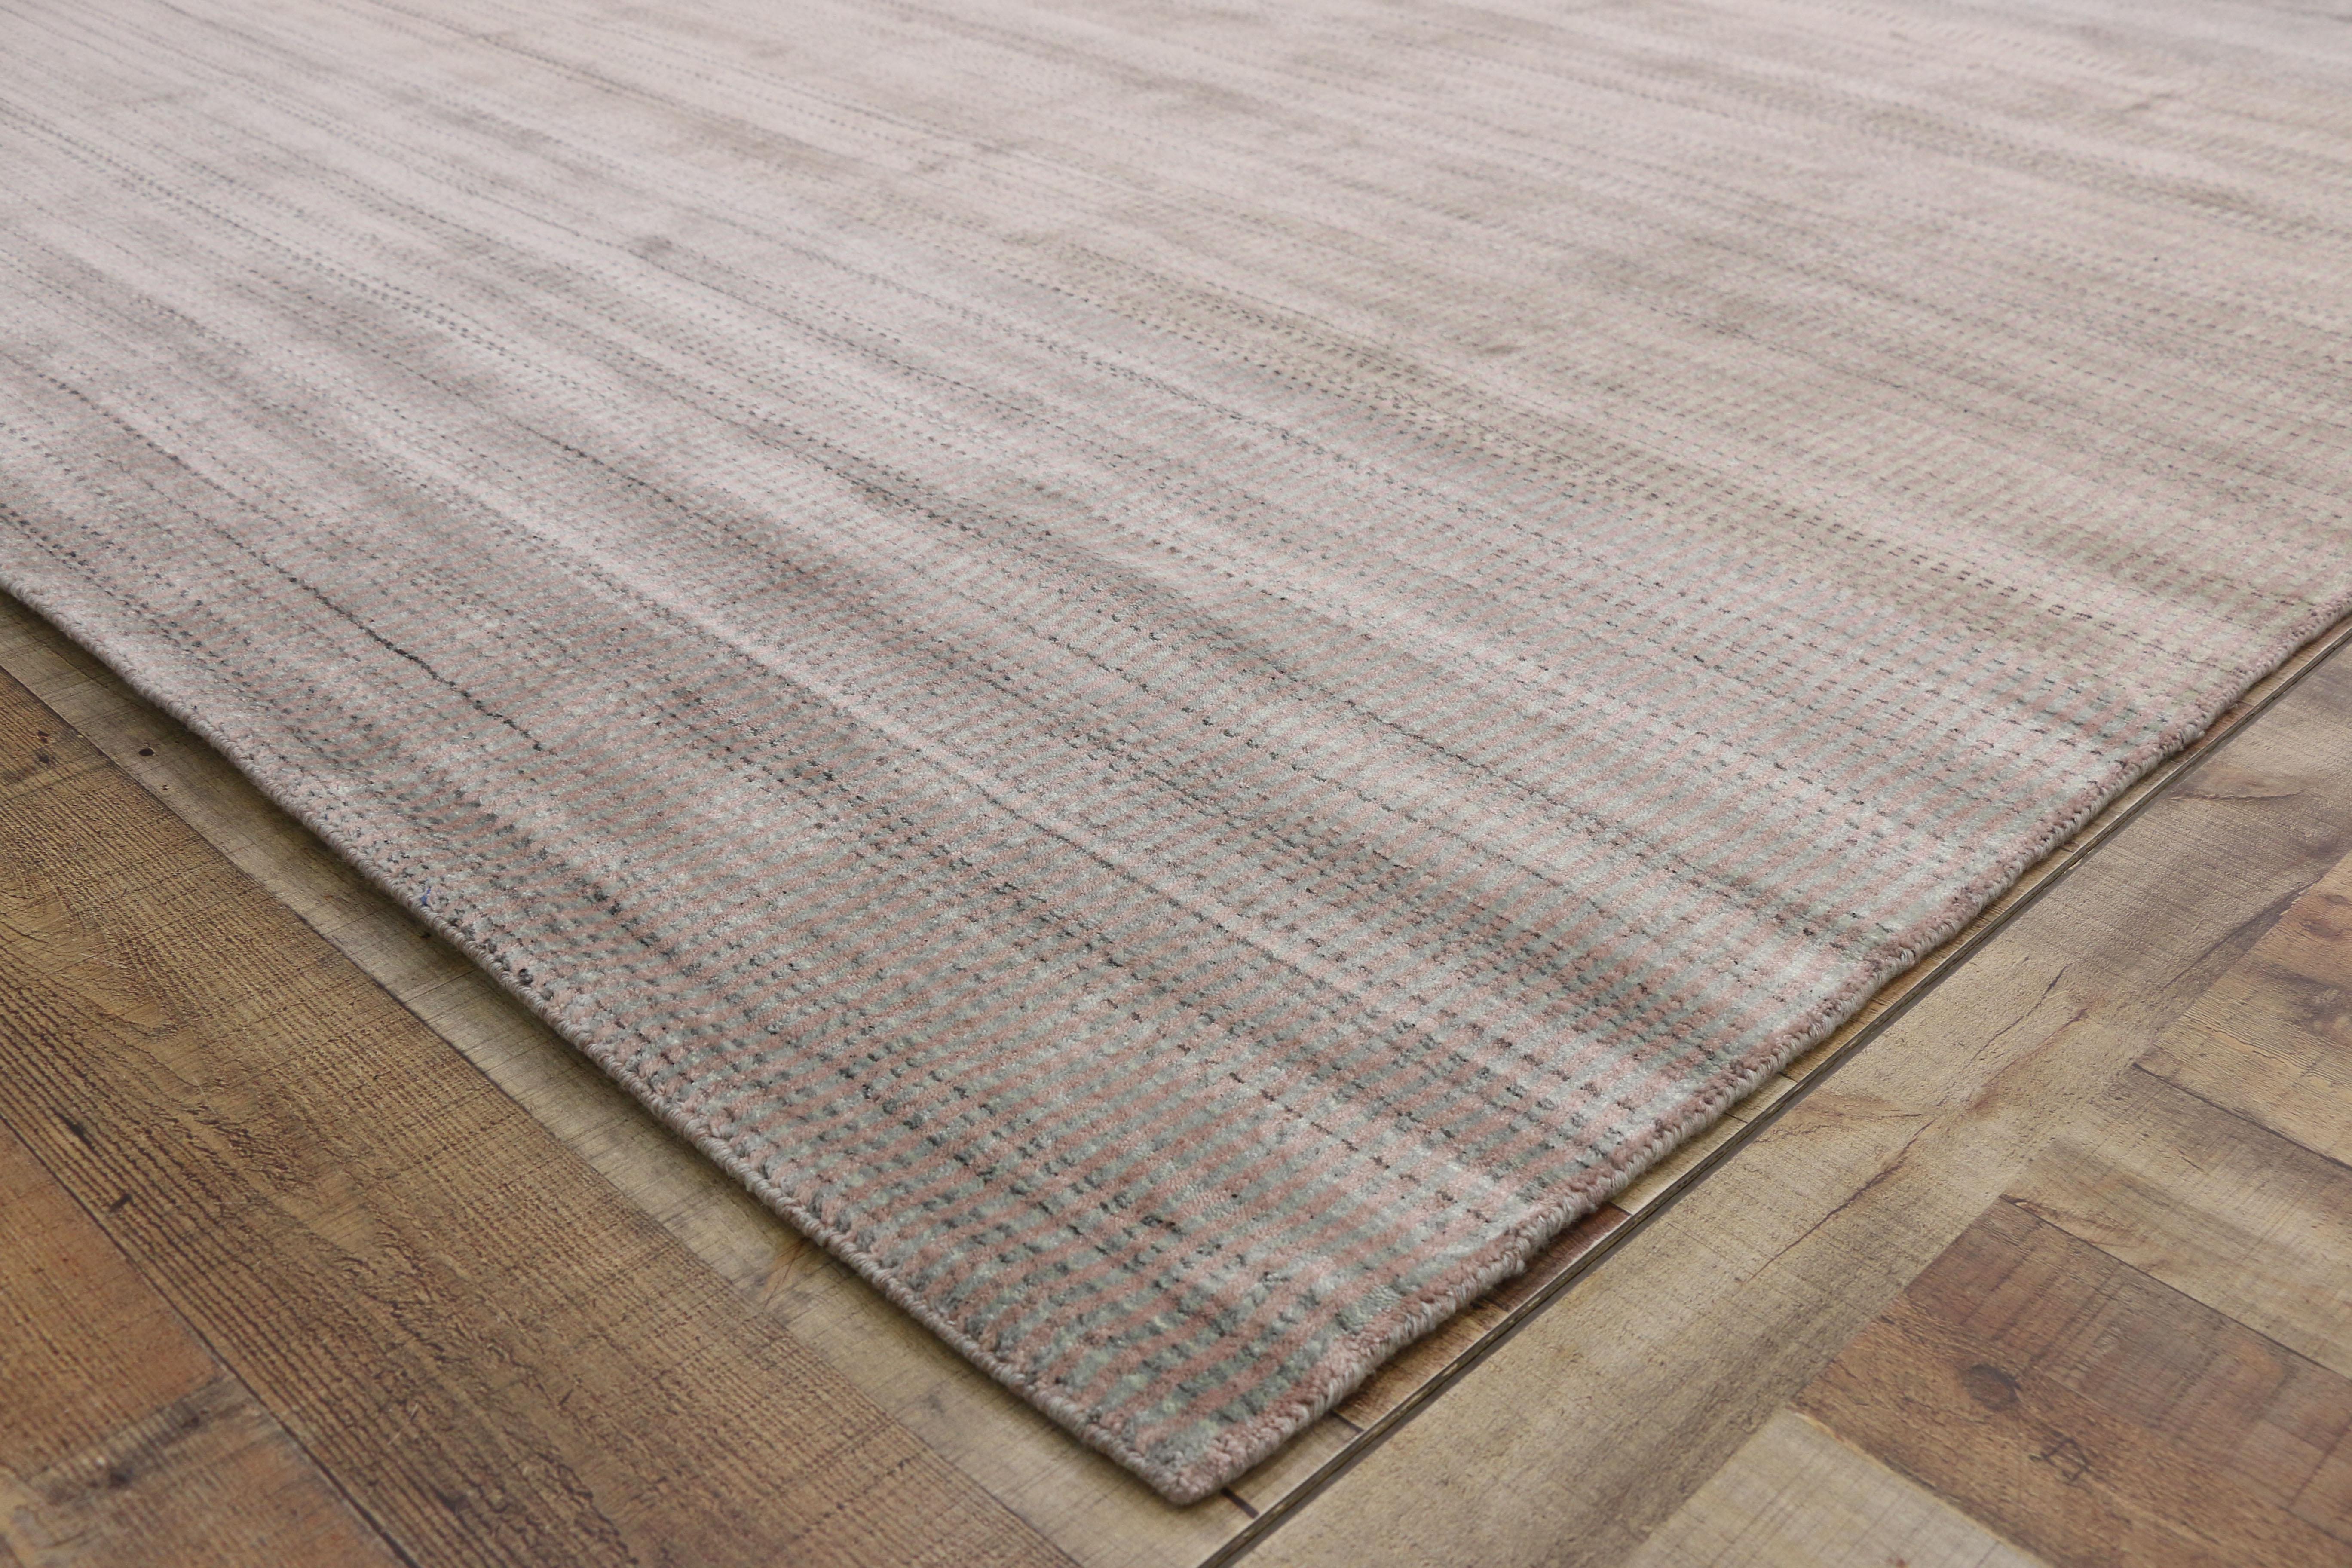 Minimalist New Transitional Ombre Area Rug with French Country and Cottage Style For Sale